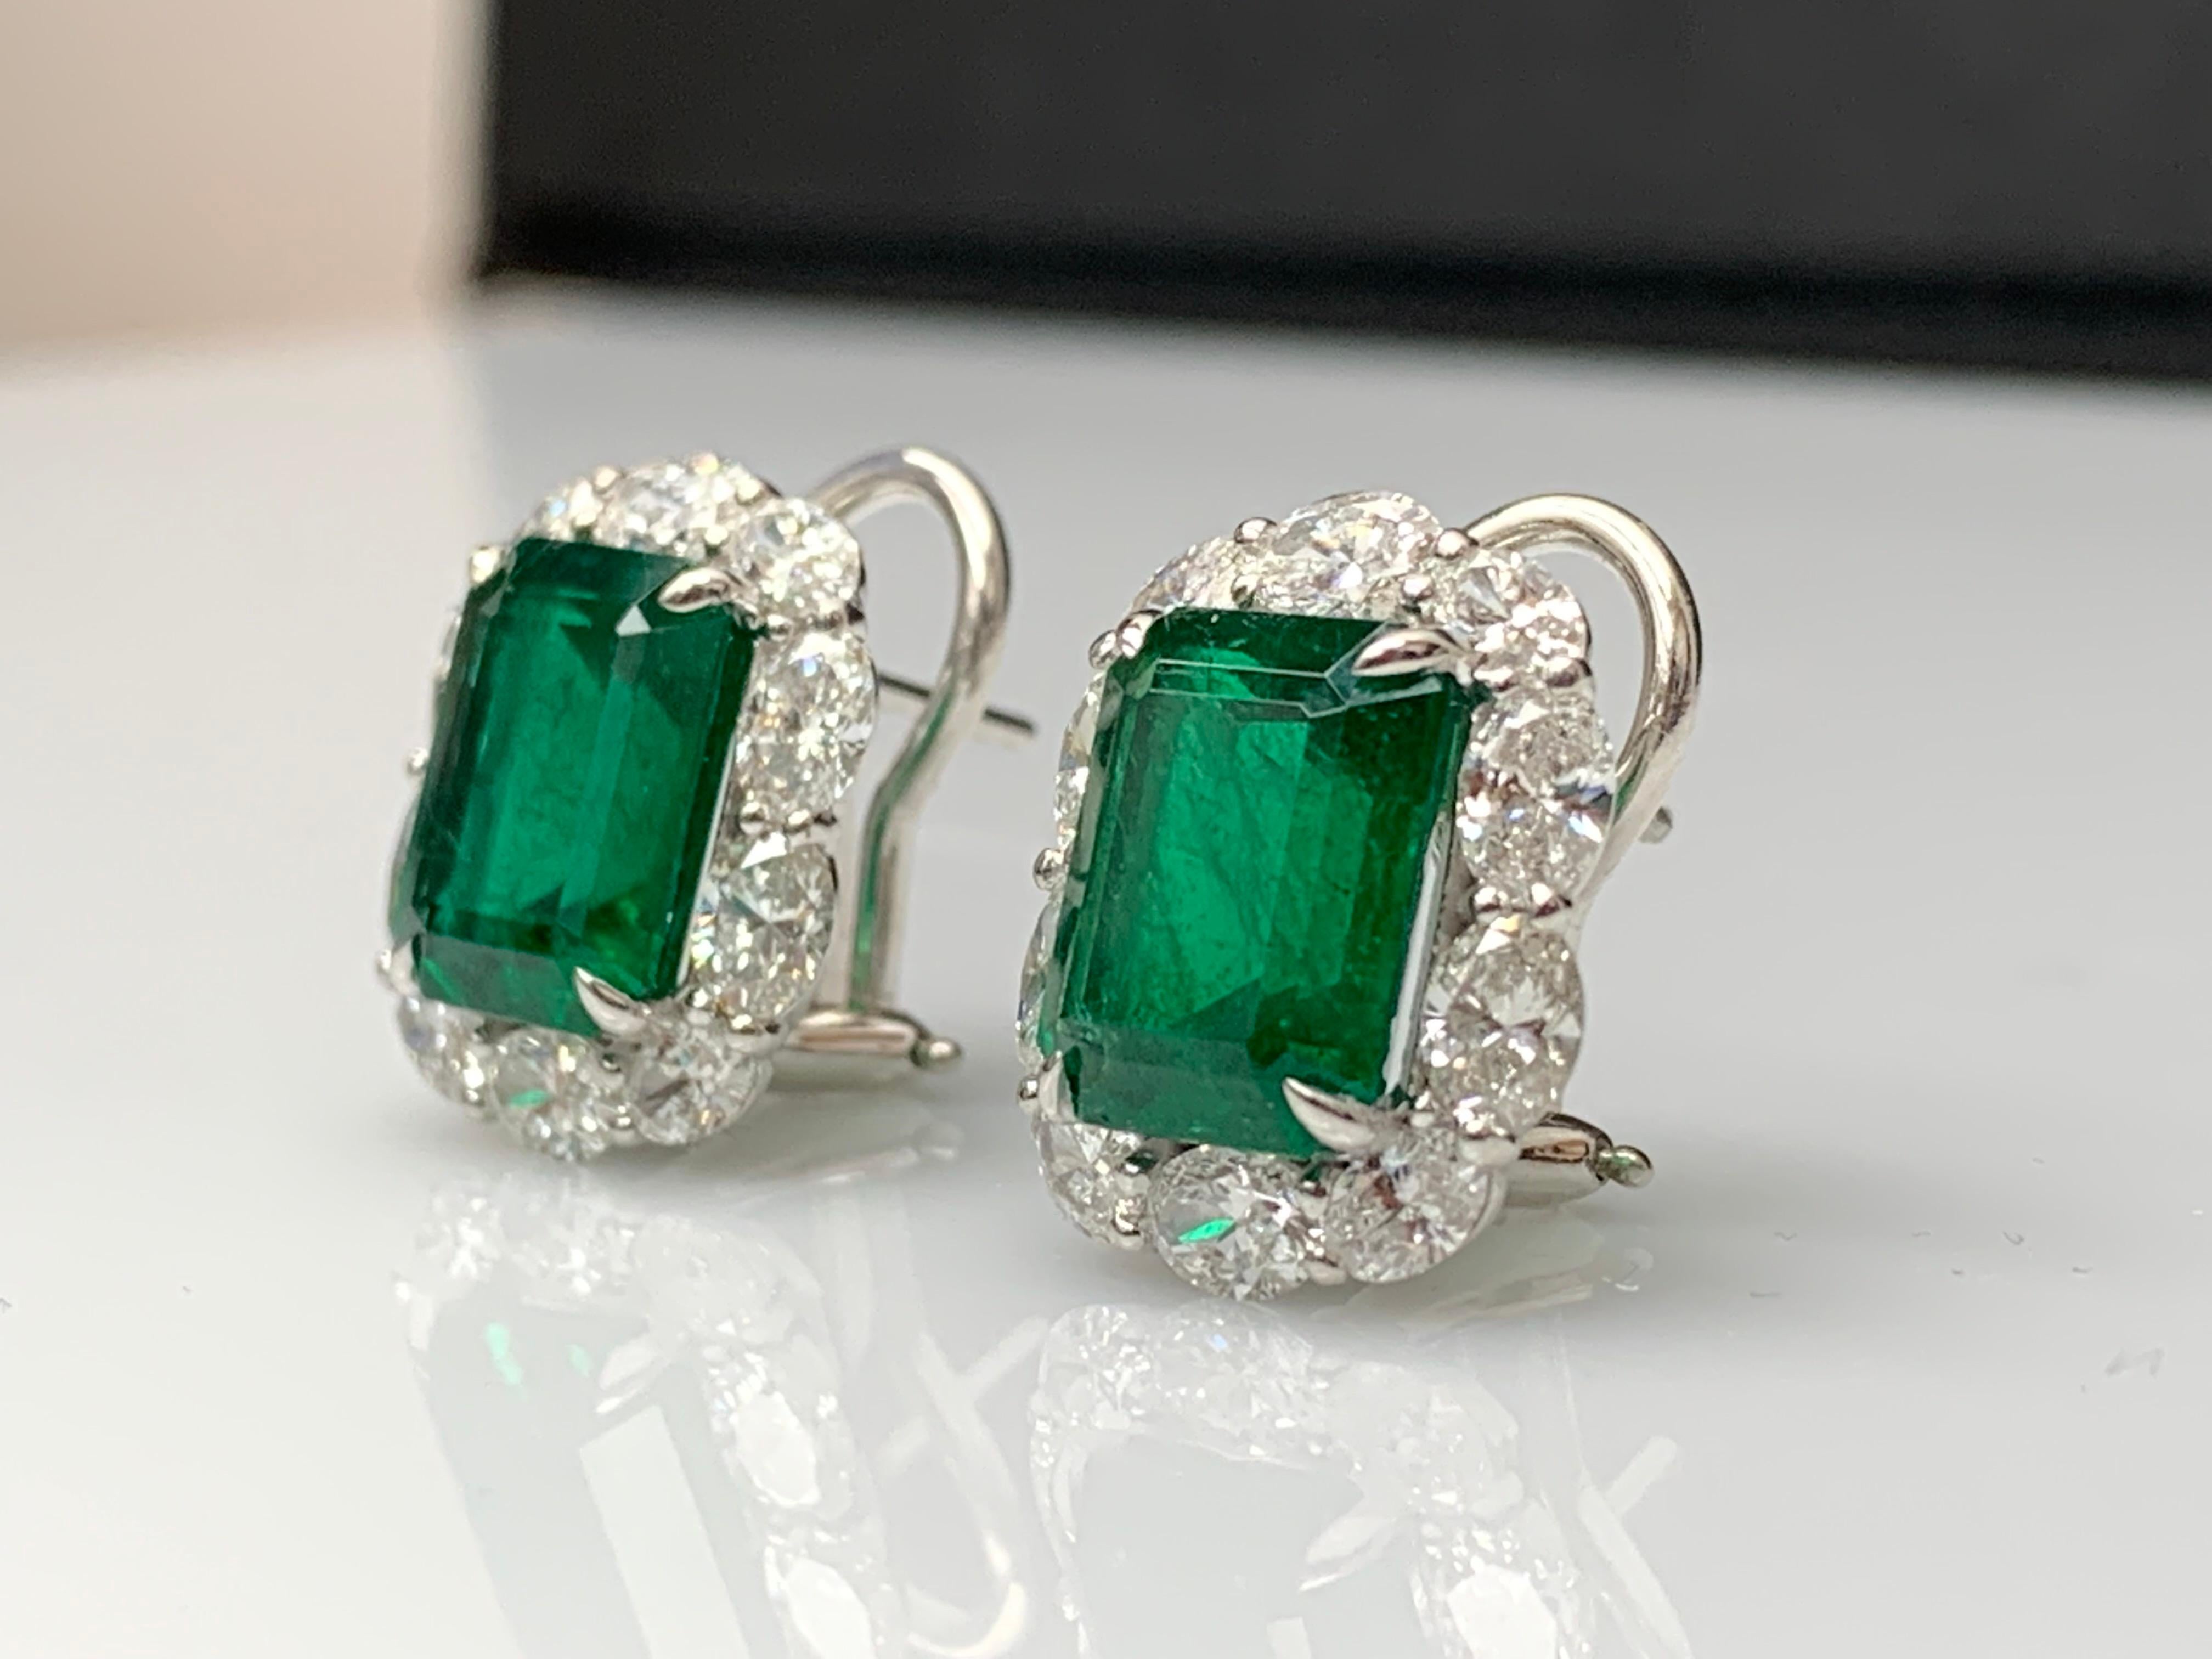 7.44 Carat Emerald Cut Emerald and Diamond Halo Earring in 18K White Gold For Sale 3